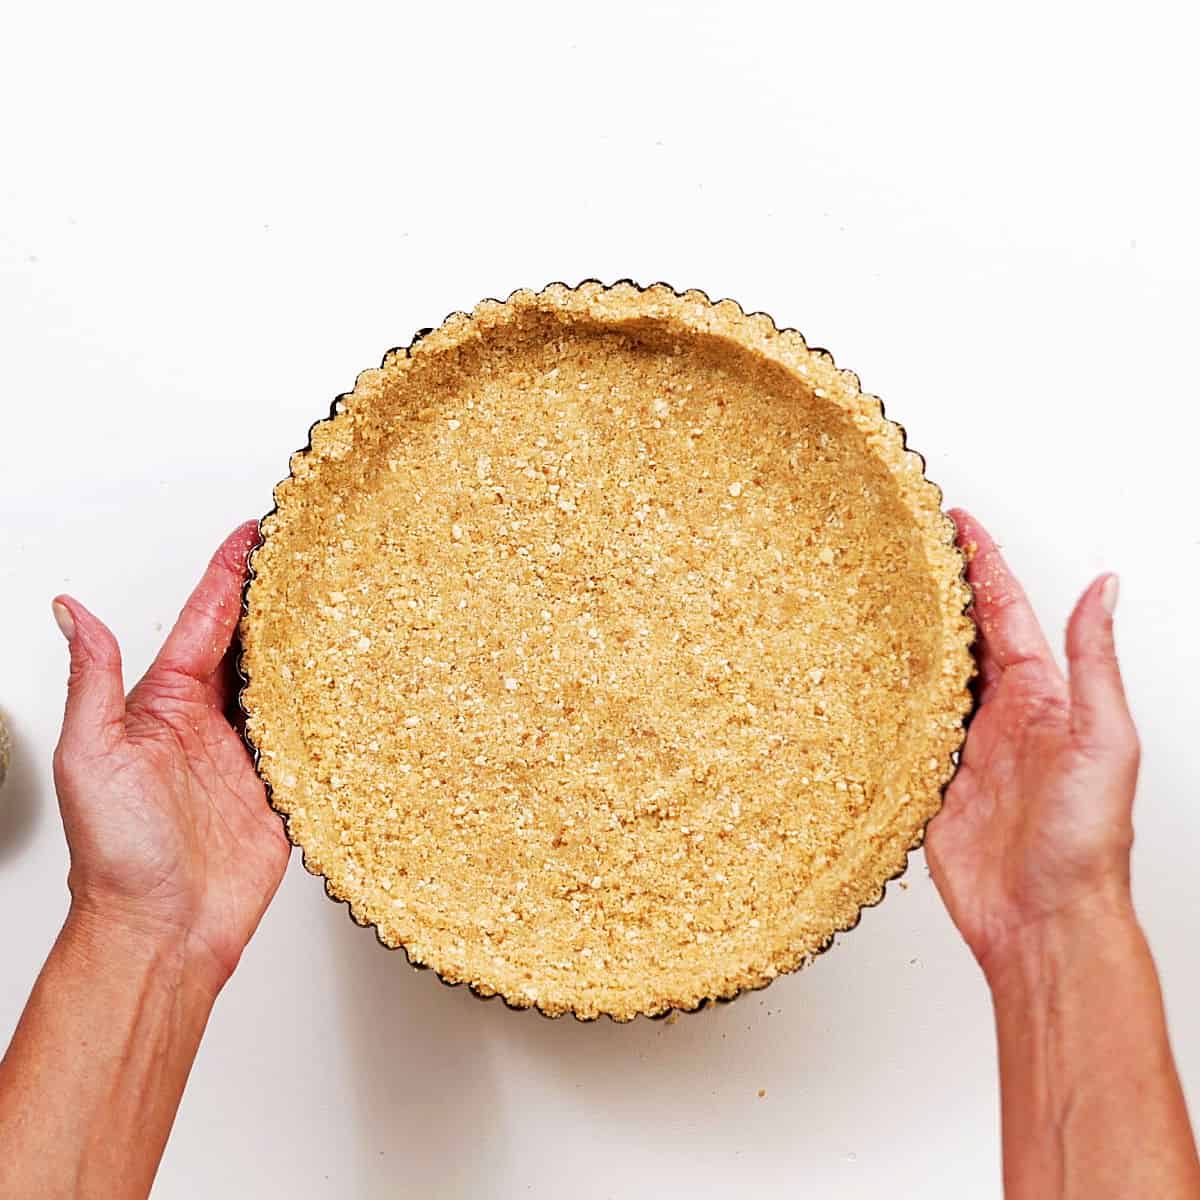 Holding graham cracker crust with both hands on white surface